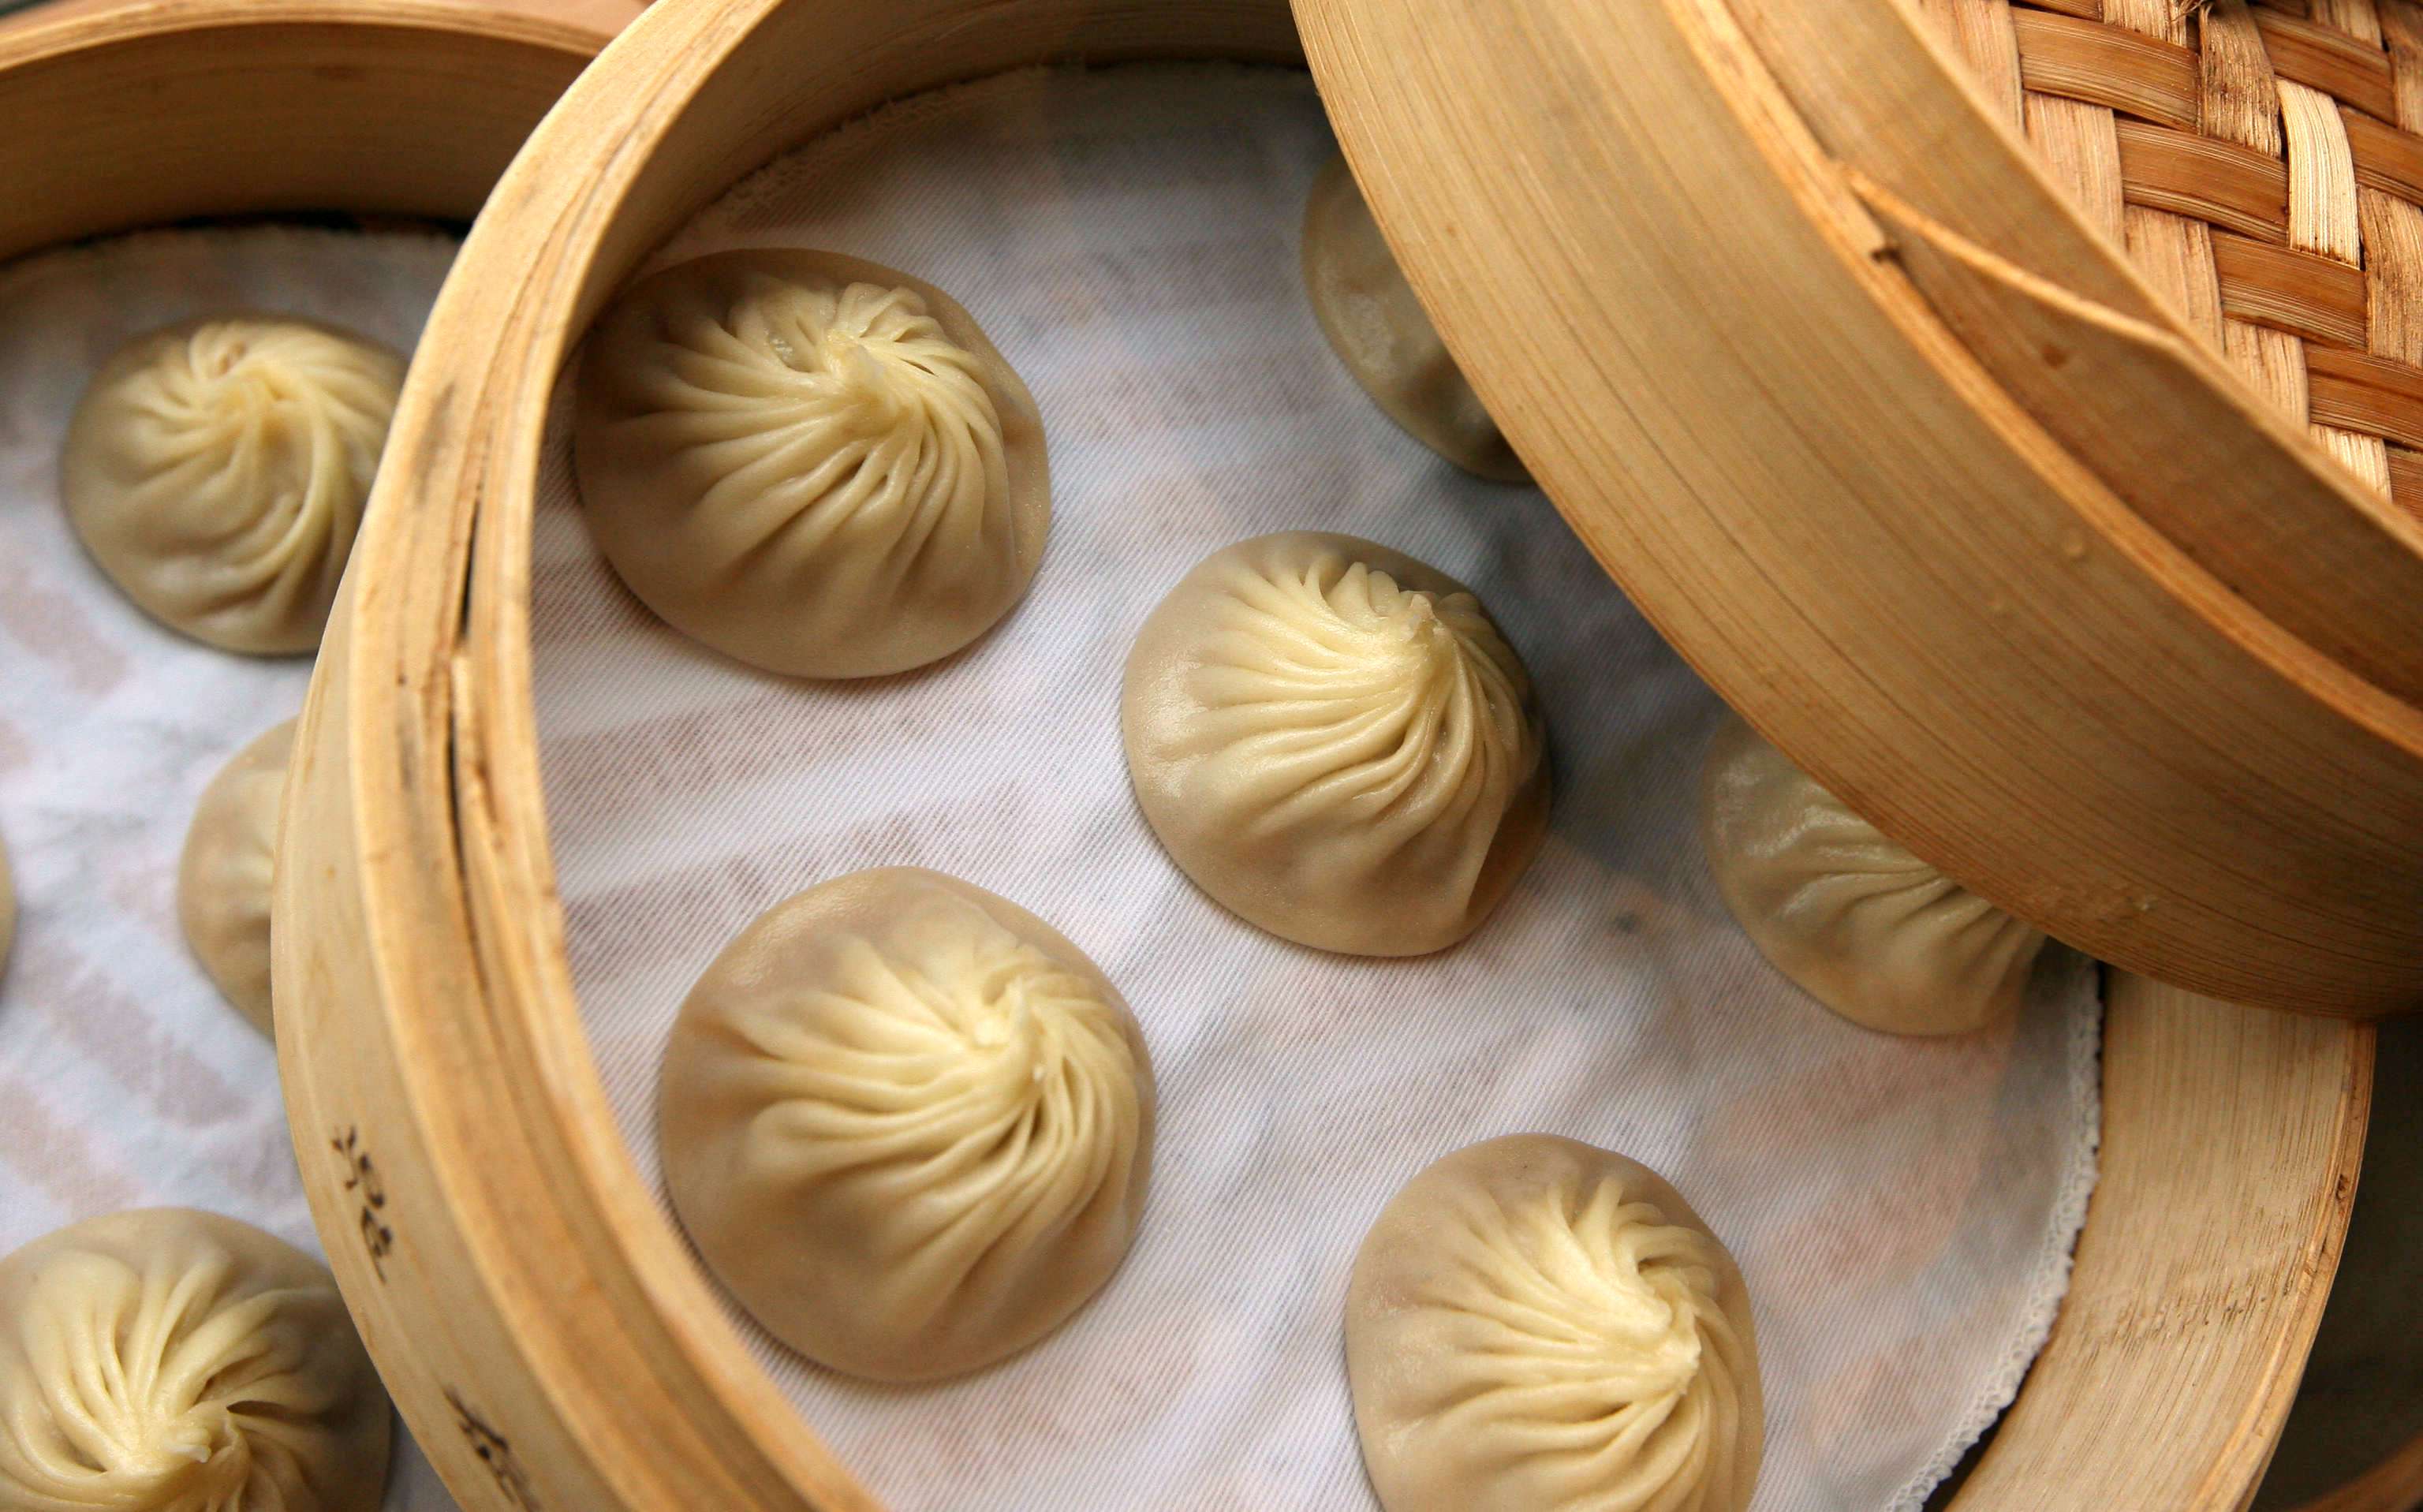 Xiaolongbao from Din Tai Fung, which tops our list of the most recommended restaurants in Hong Kong. Photo: Jonathan Wong.